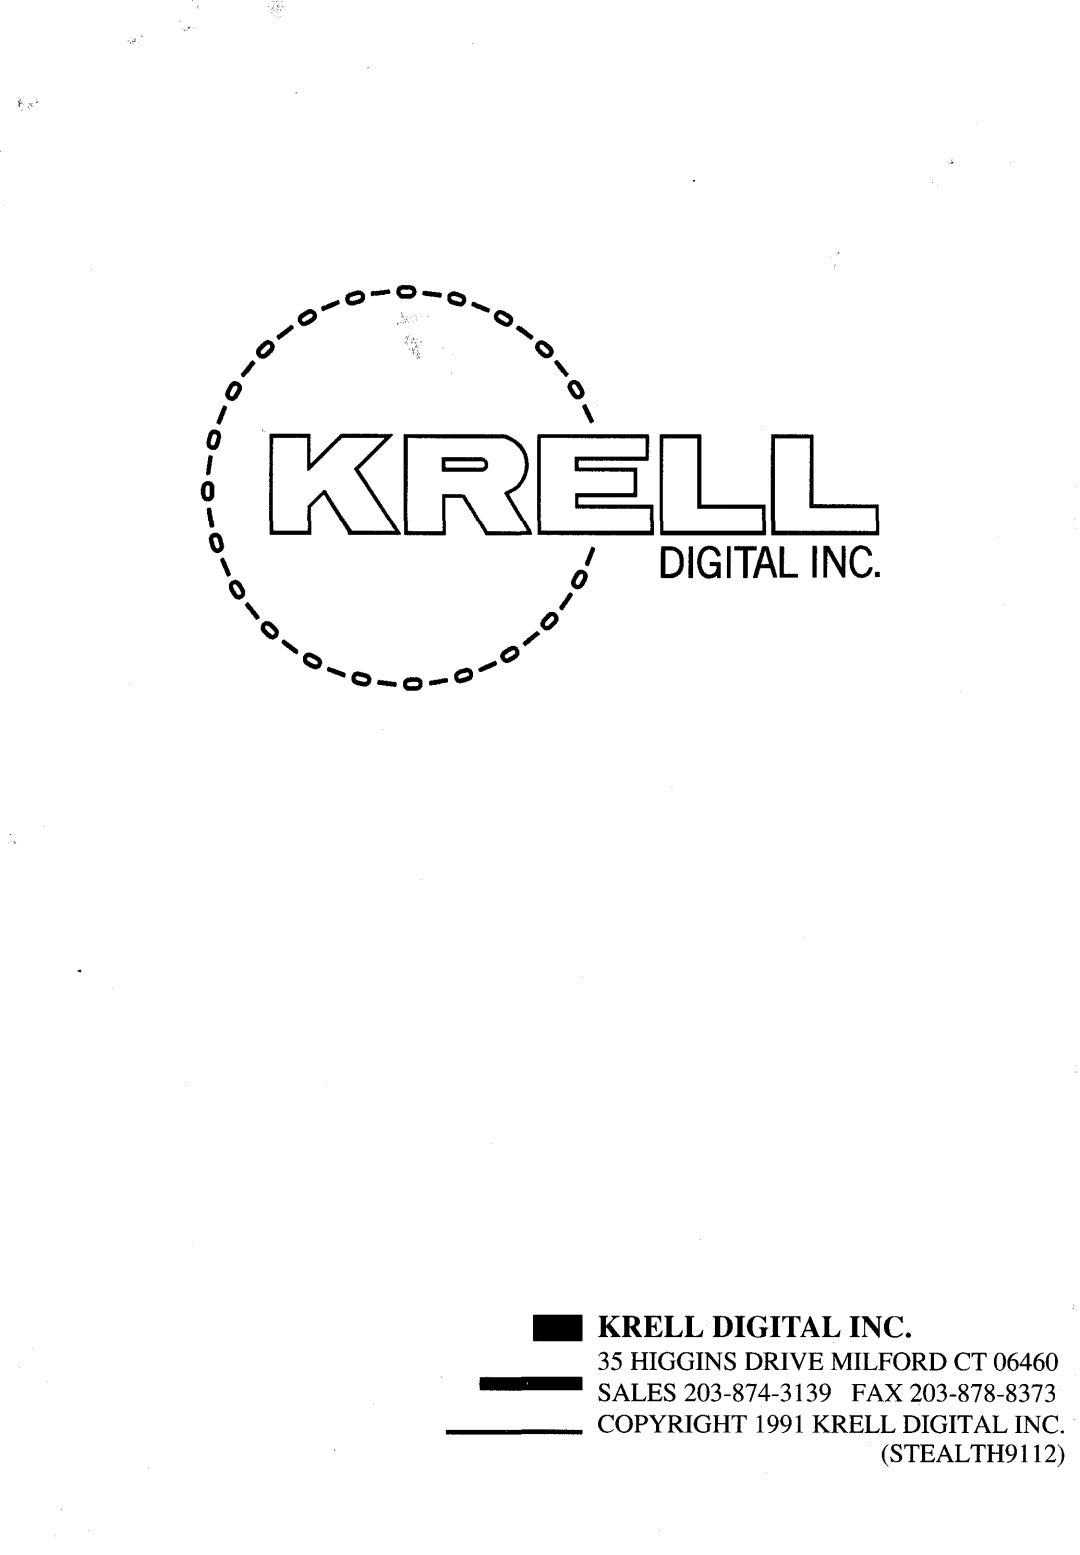 Krell Industries Stereo Preamplifie manual Digitalinc, Krell Digital Inc, COPYRIGHT1991 KRELLDIGITAL INC STEALTH9112 